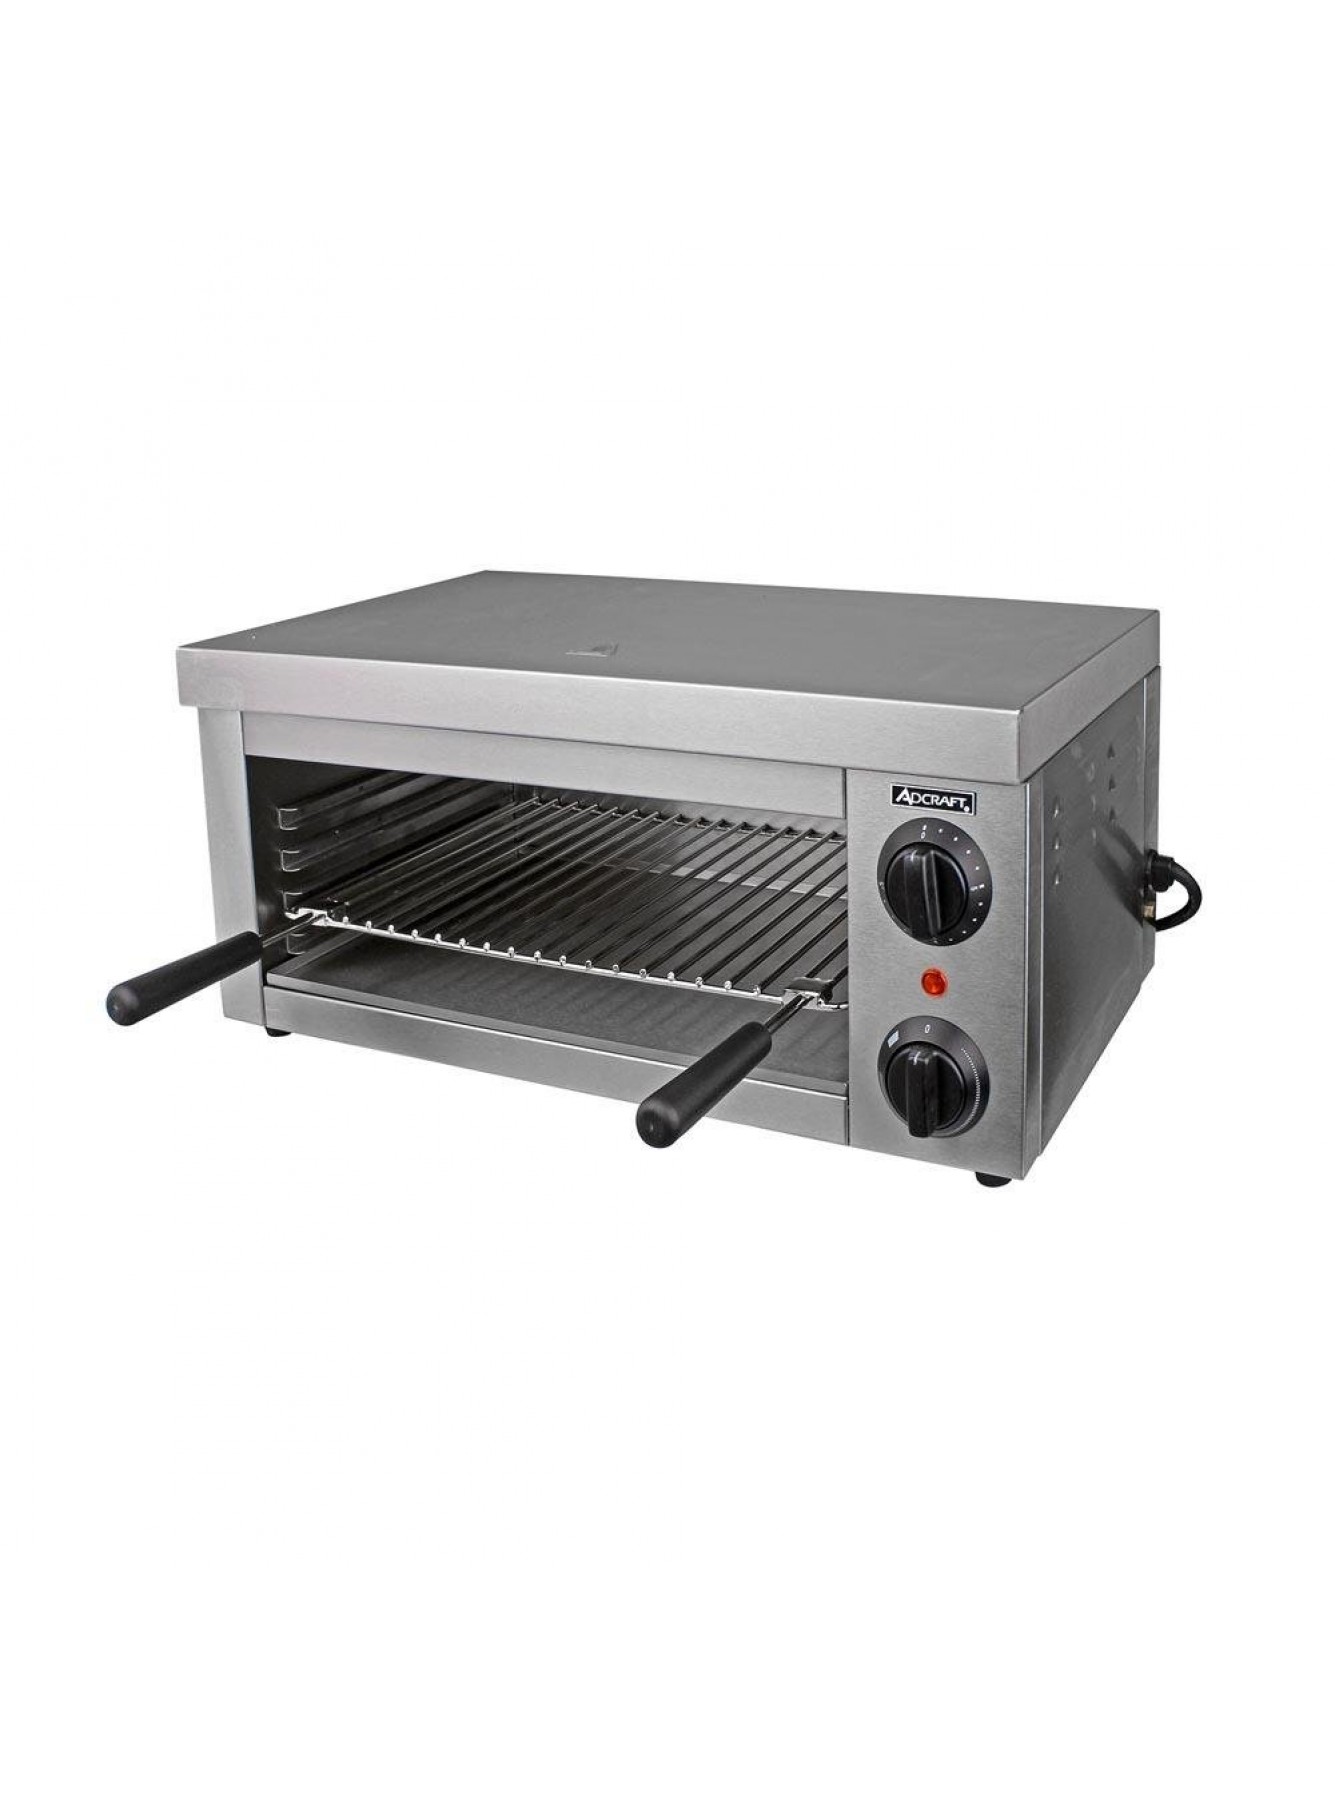 Adcraft CHM-1200W Electric Cheesemelter 24-Inch Stainless Steel 120v Silver B01D5C3VCS